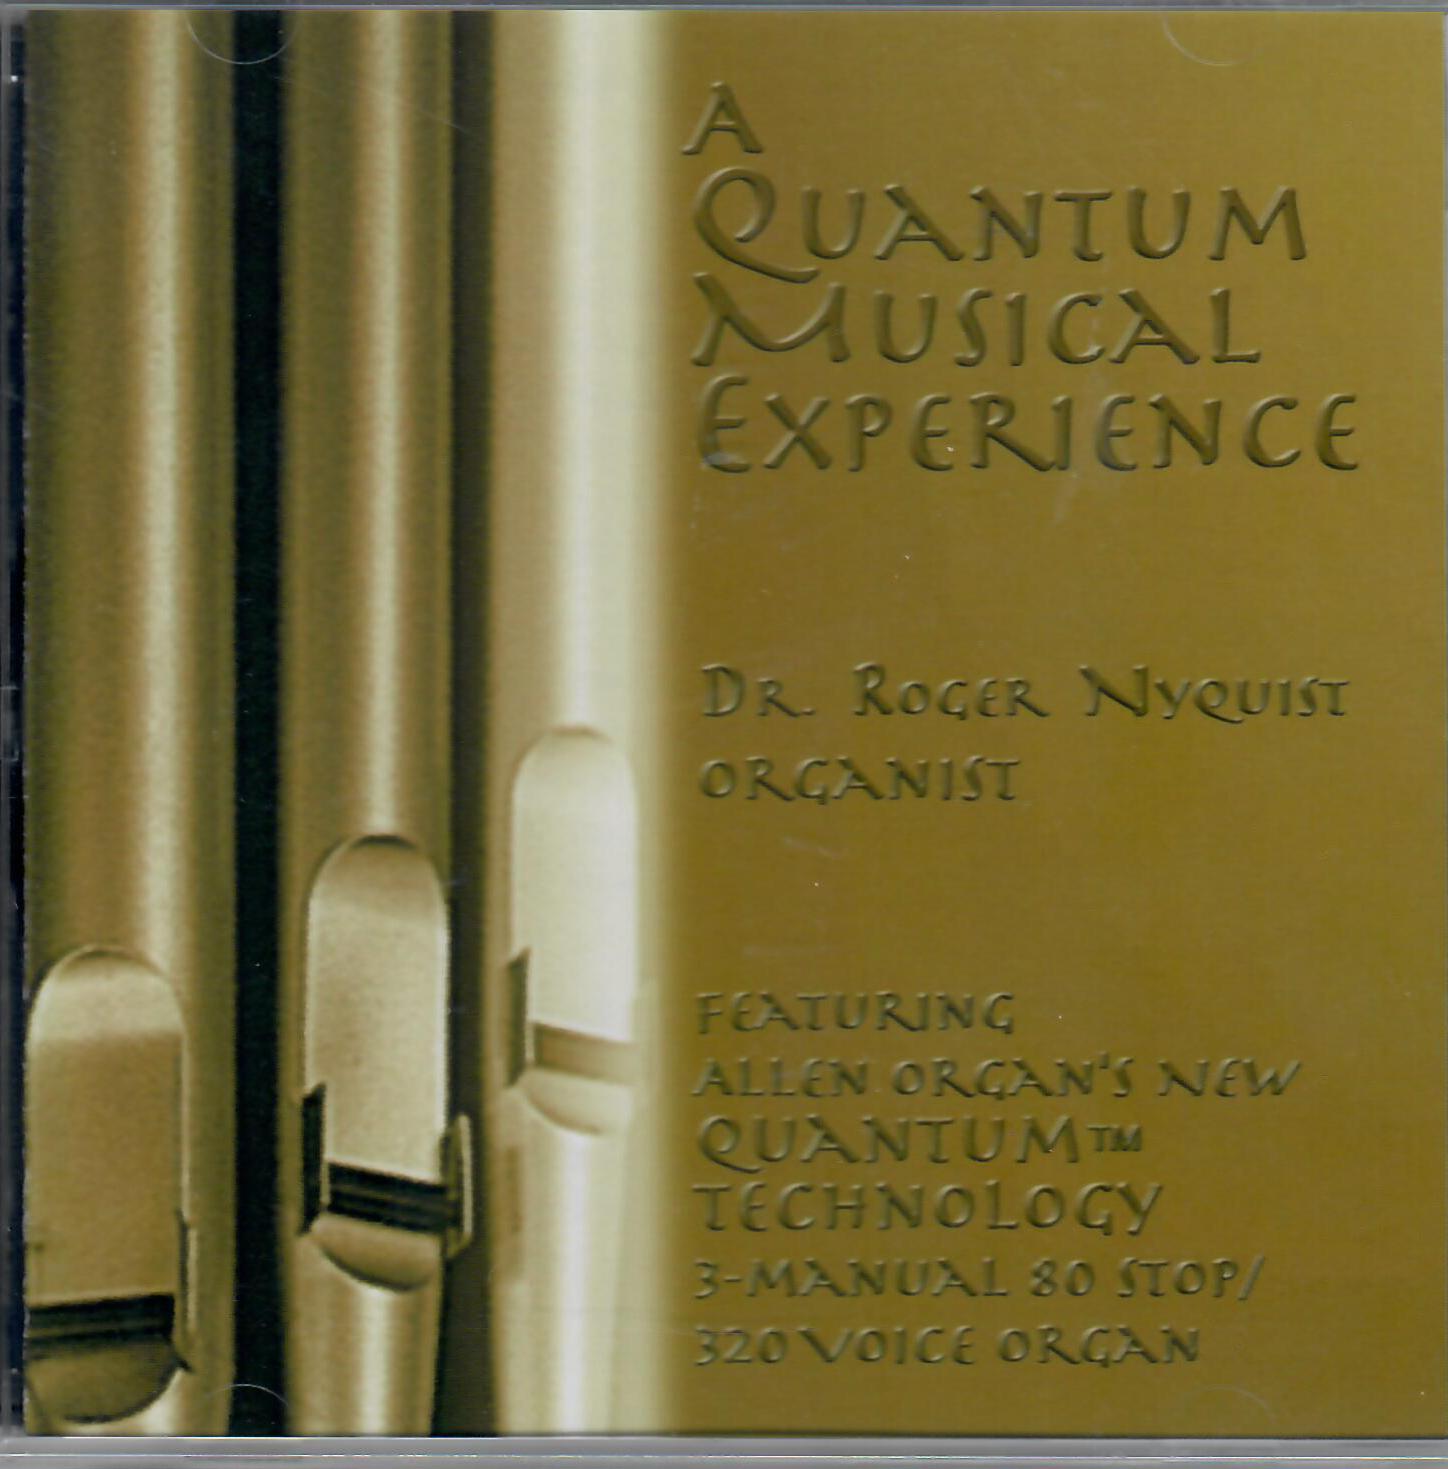 Dr Roger Nyquist: A Quantum Musical Experience.